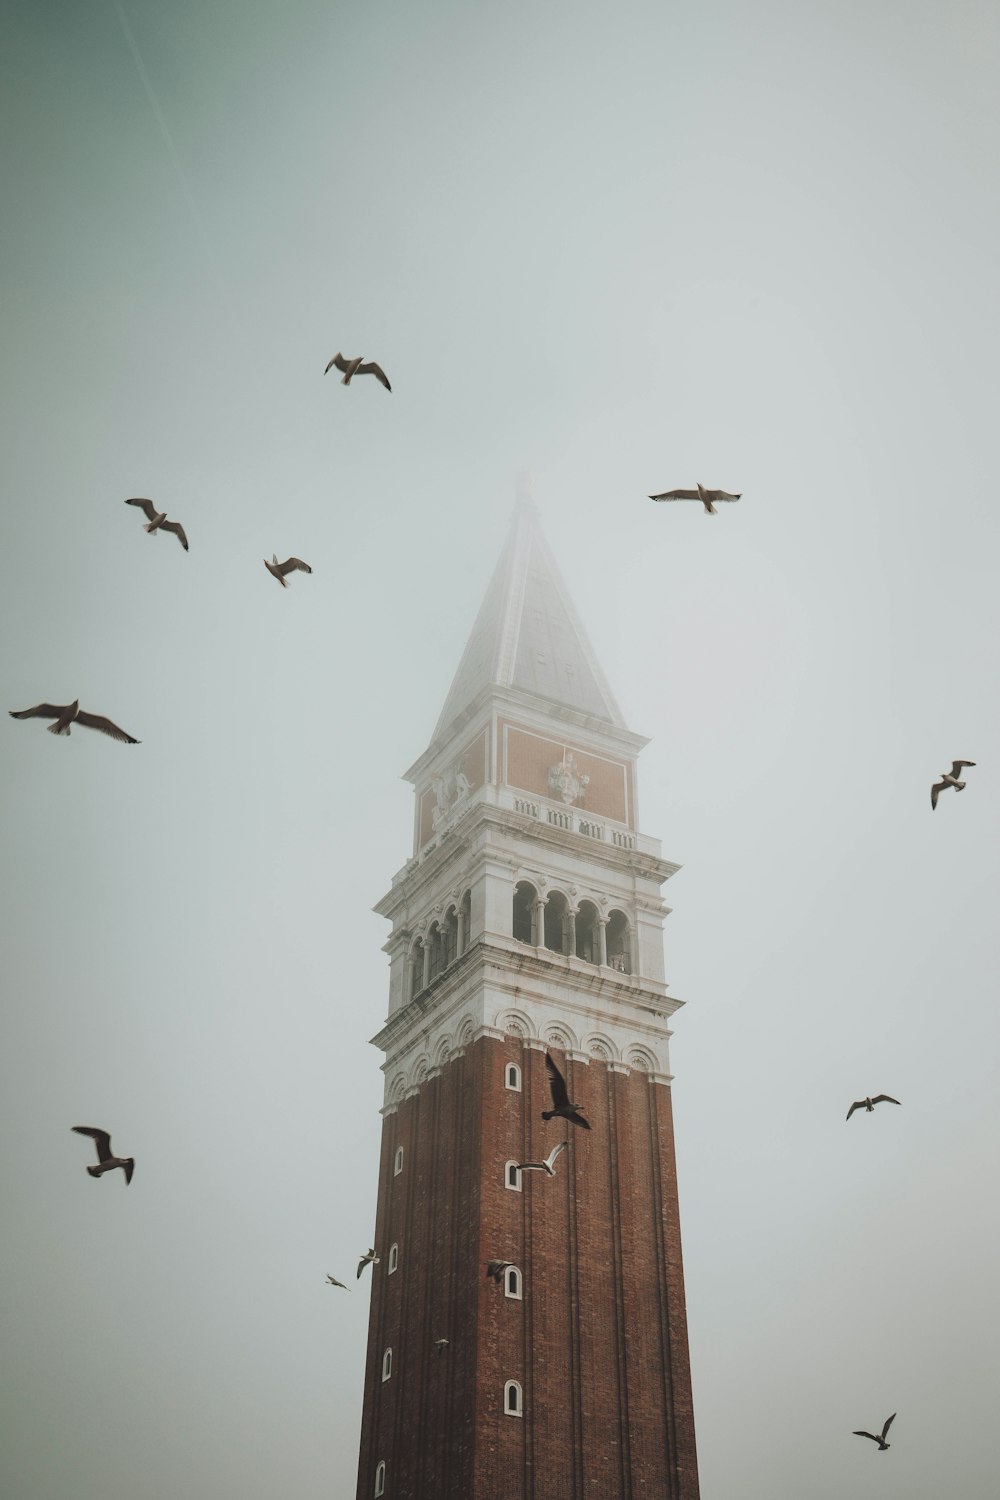 a clock tower with birds flying around it